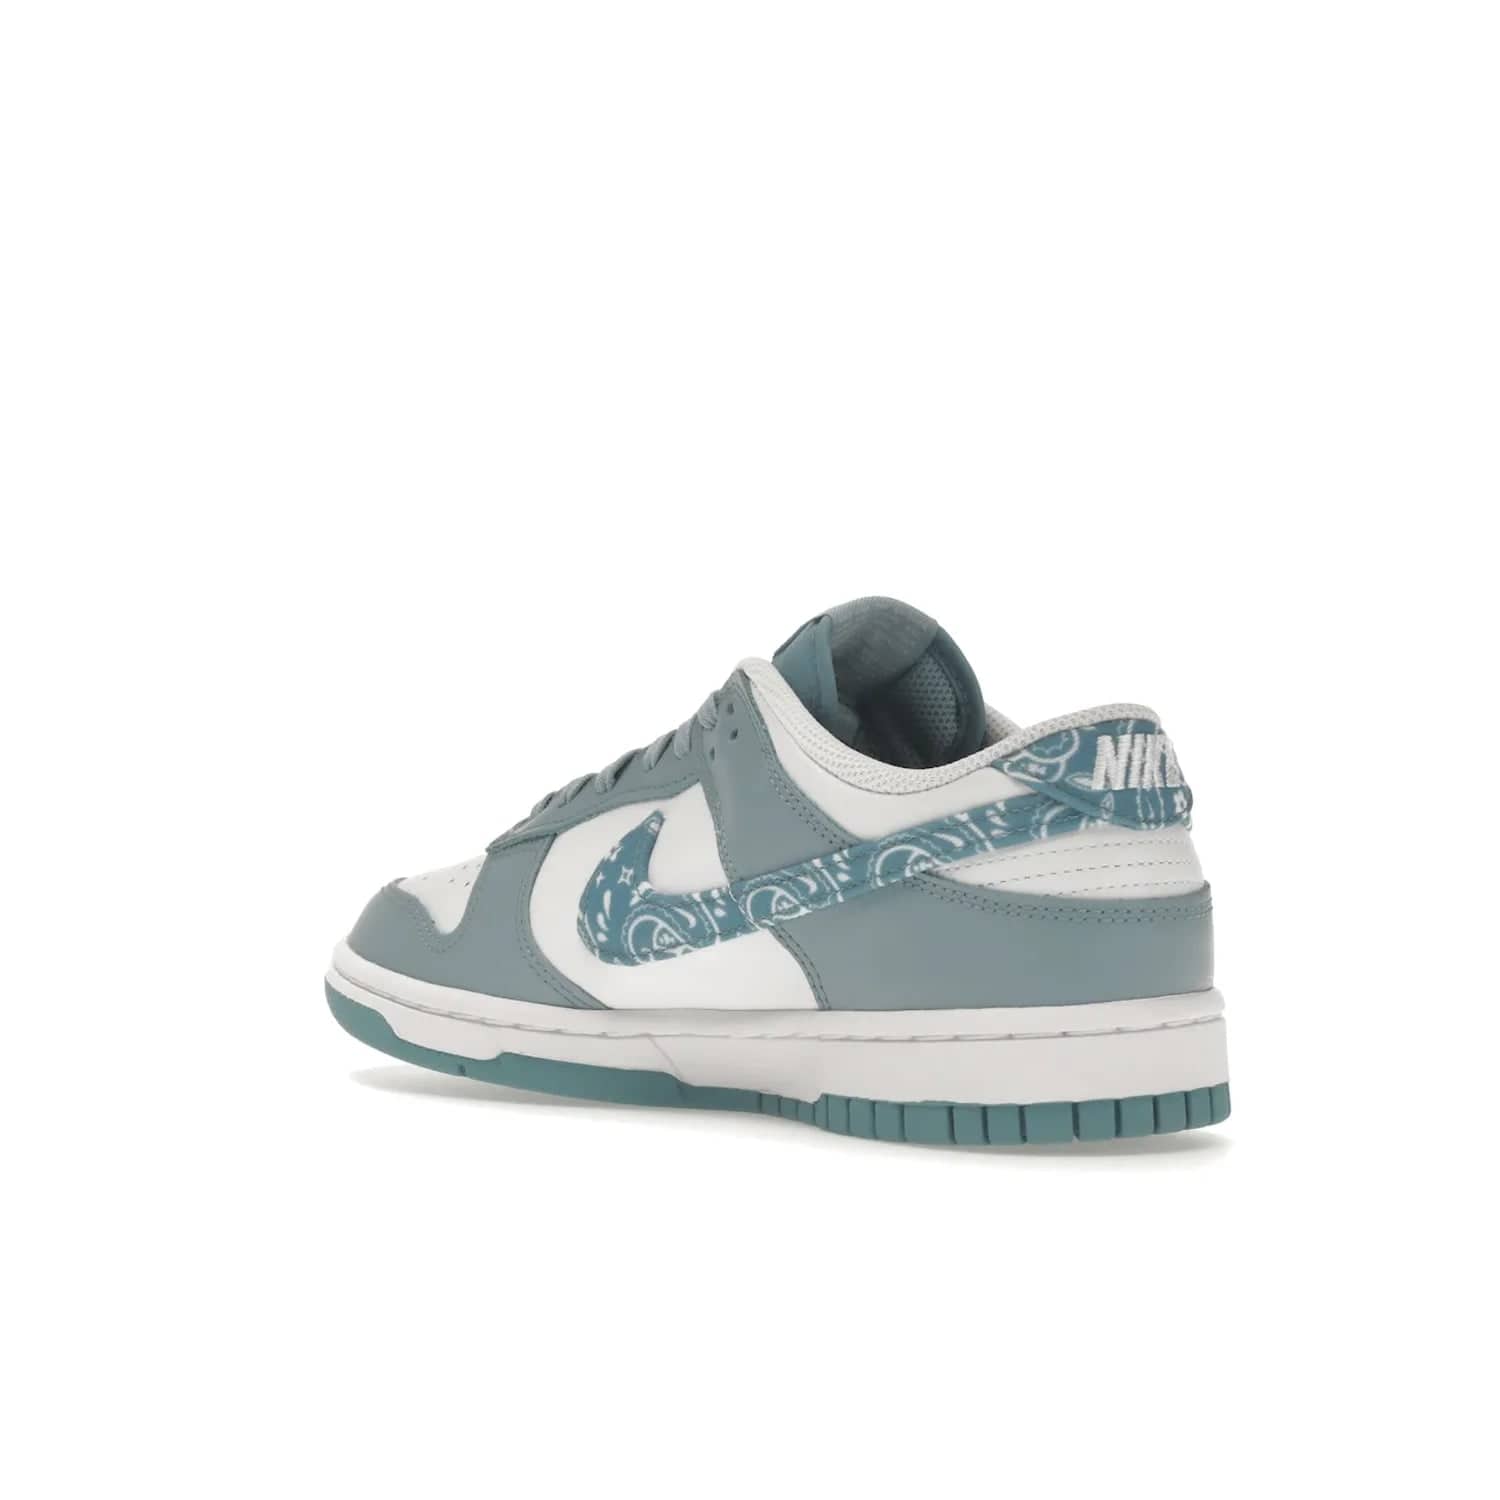 Nike Dunk Low Essential Paisley Pack Worn Blue (Women's) - Image 24 - Only at www.BallersClubKickz.com - Get the Nike Dunk Low Essential Paisley Pack Worn Blue (Women's) for style and comfort. White leather construction, light blue leather overlays, canvas Swooshes and matching heel tabs offer a rich blue hue. Finished by a white and light blue sole, this classic Nike Dunk is the perfect addition to any wardrobe. Released in March 2022.